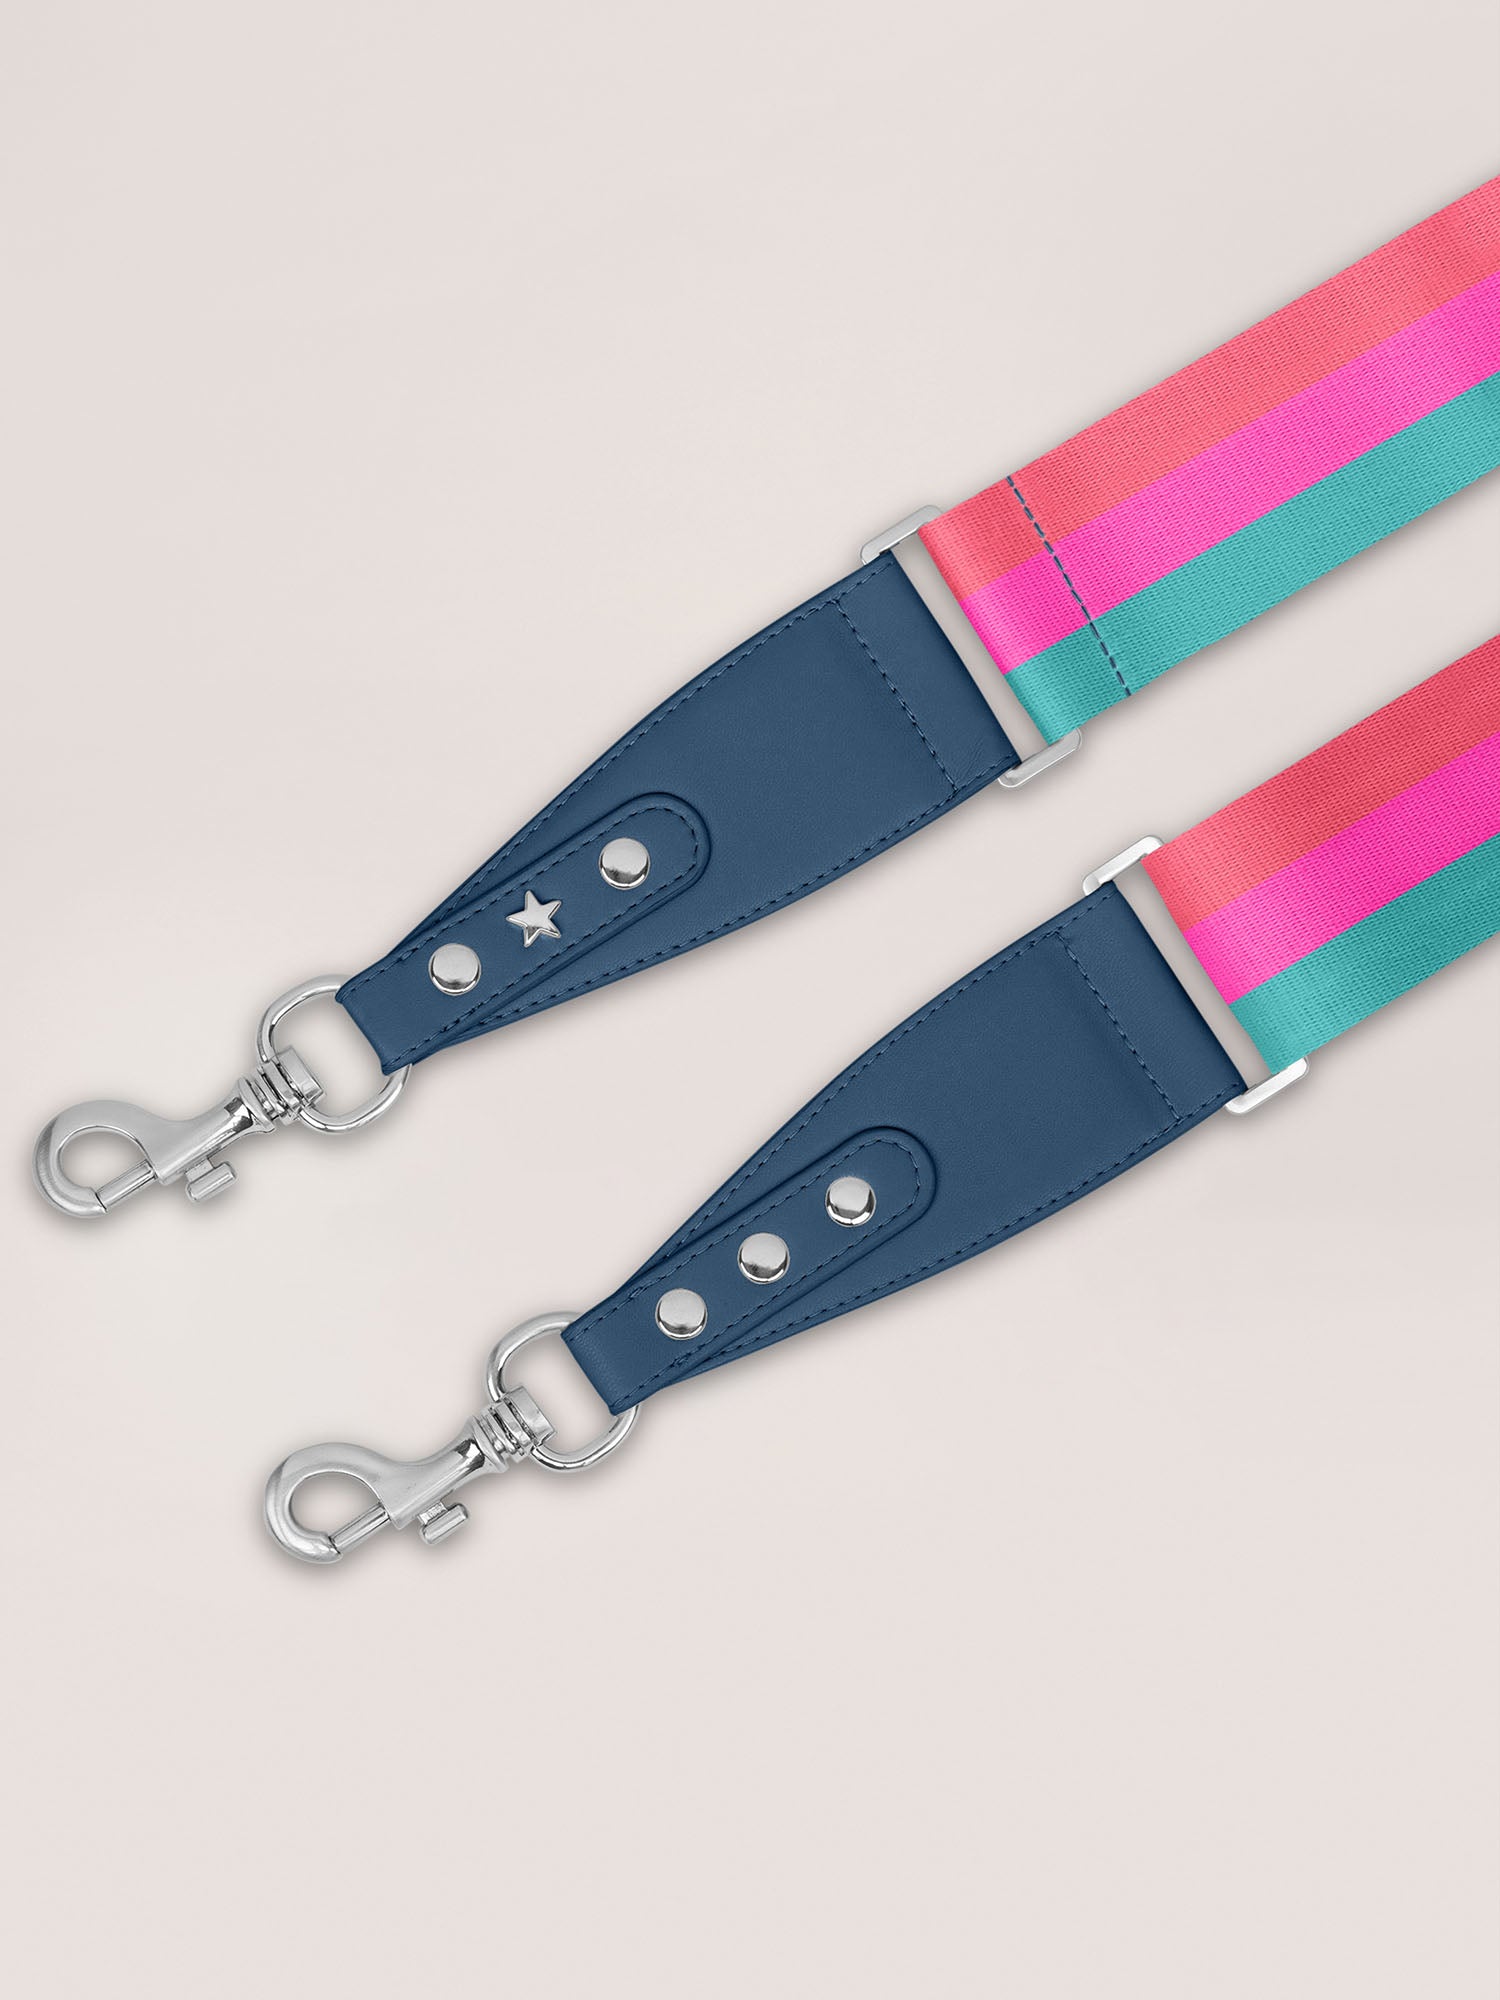 Woven Strap - Teal, Coral, & Pink